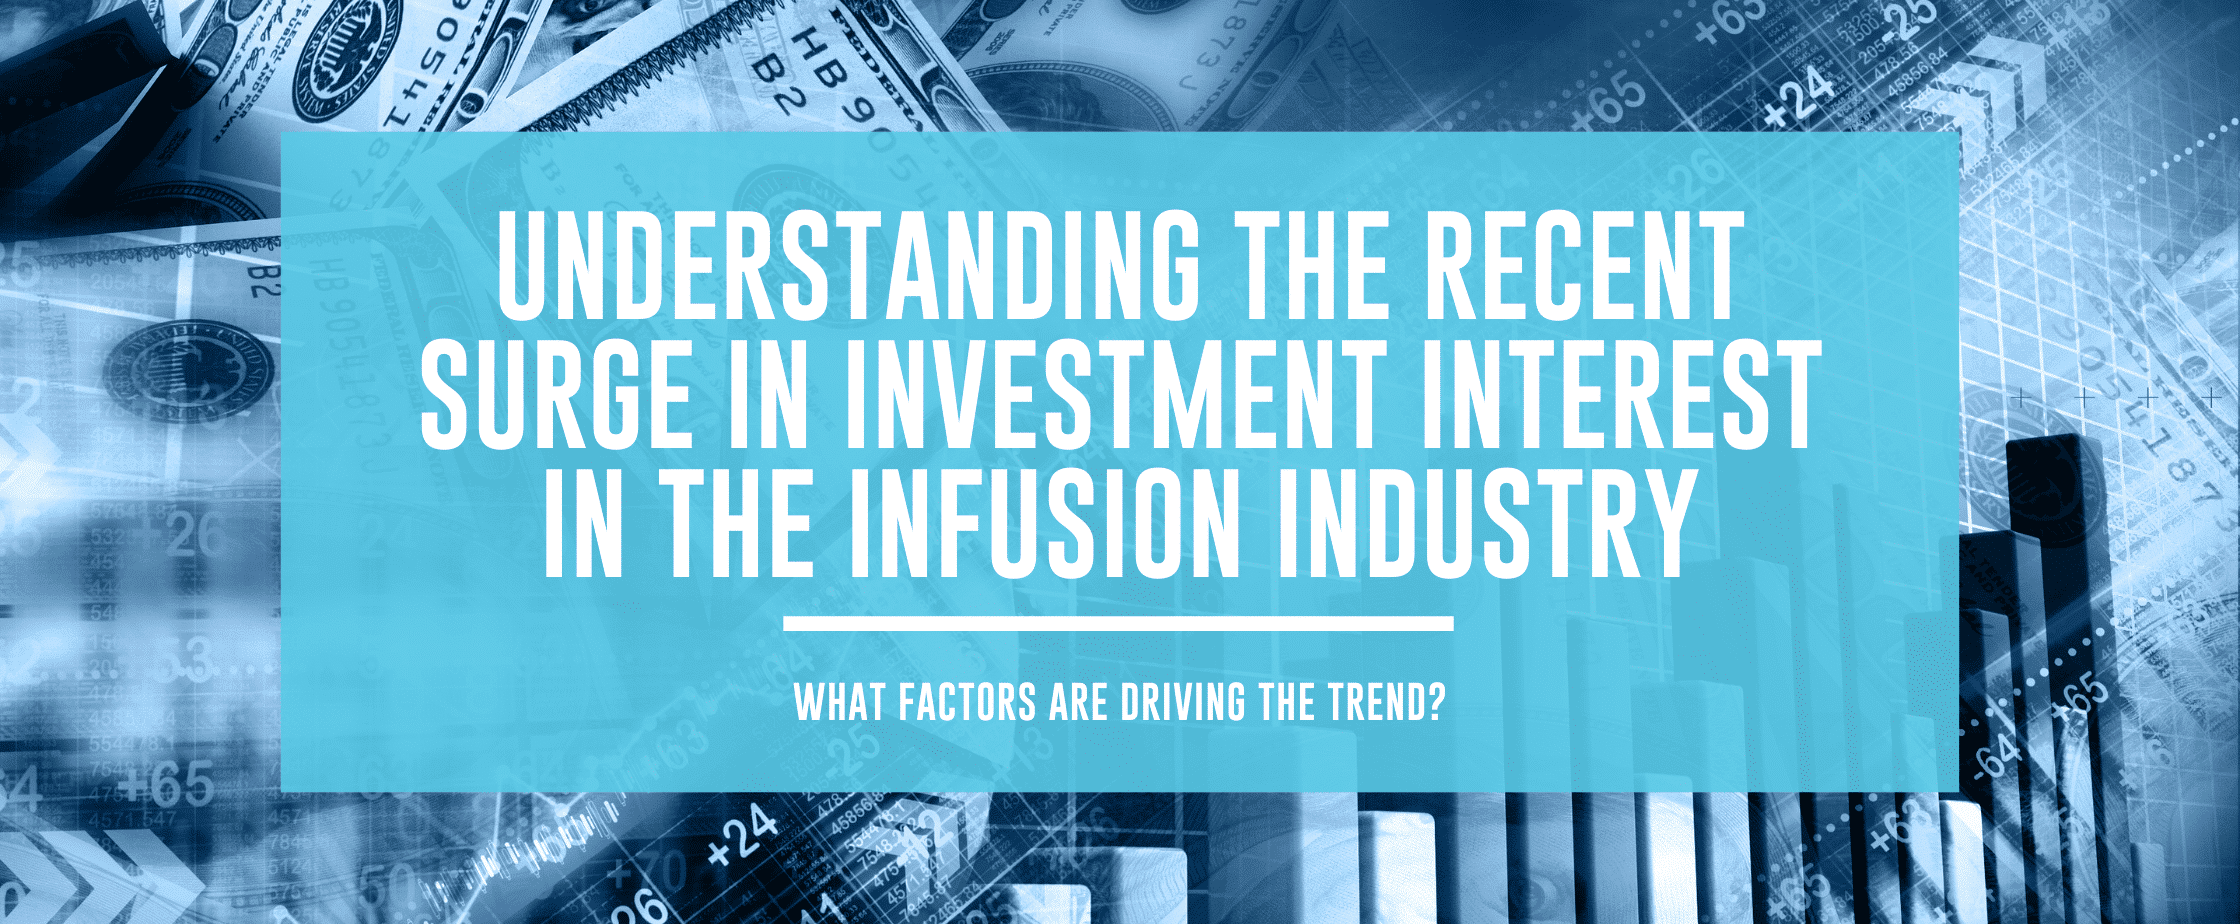 Featured image for Understanding the Recent Surge in Investment Interest in the Infusion Industry